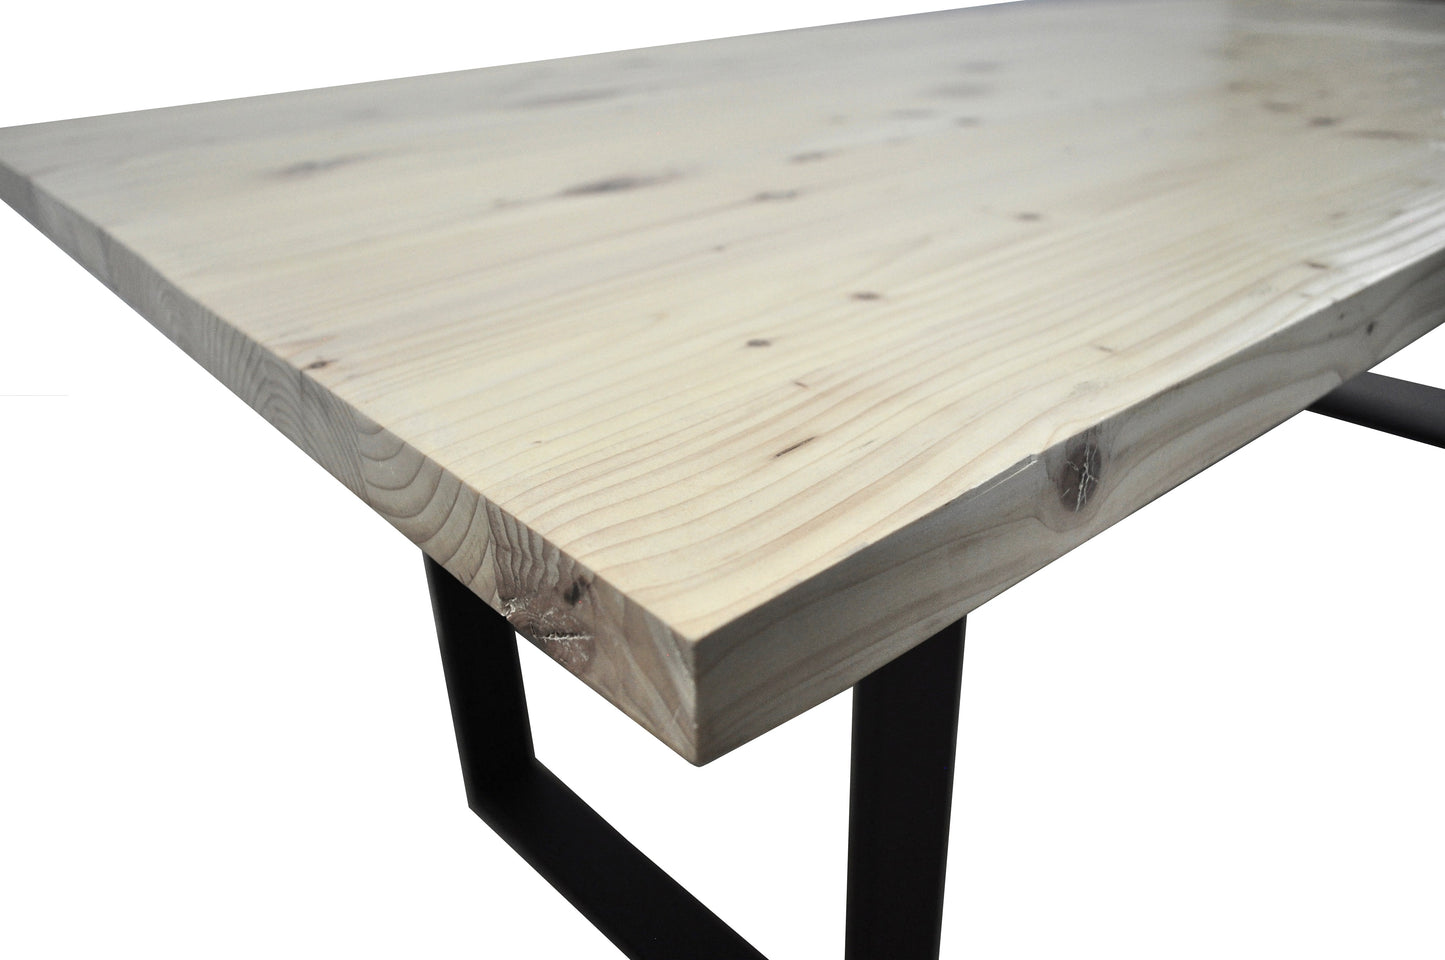 Pulvis Dining Table